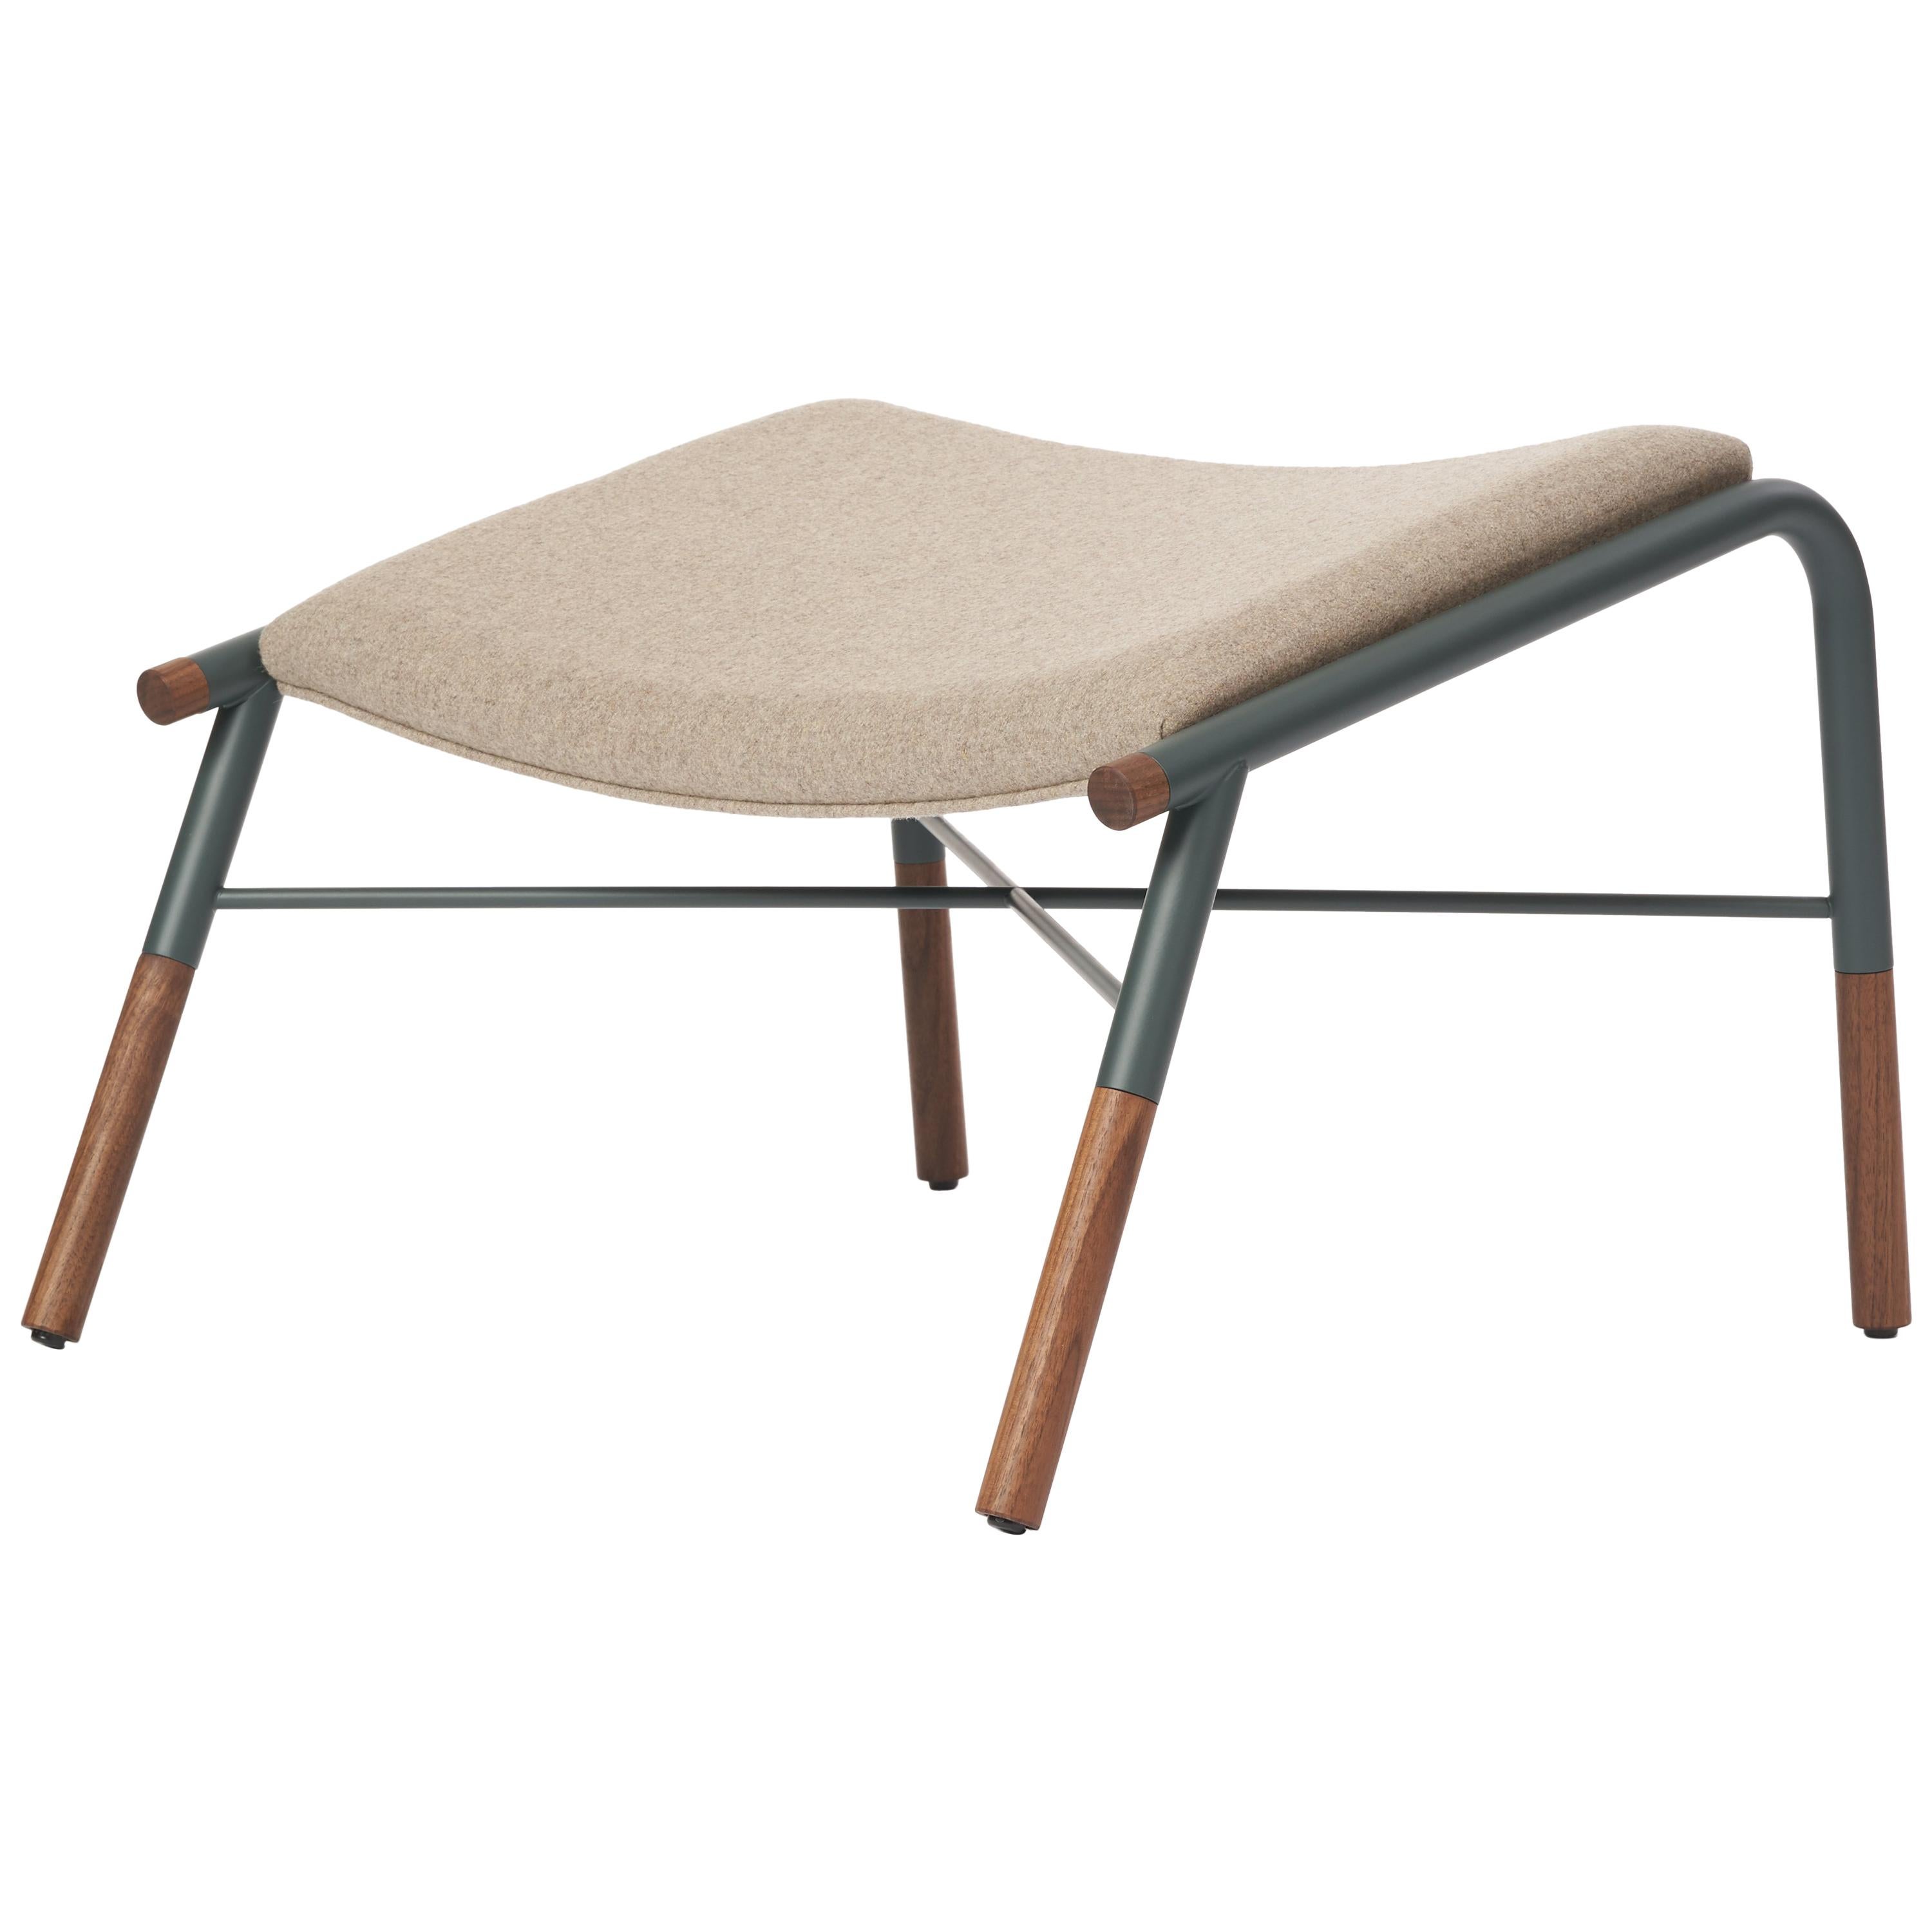 49N Lounge Chair Ottoman, Melton Wool and Eco-Friendly Powder Coated Steel Frame For Sale